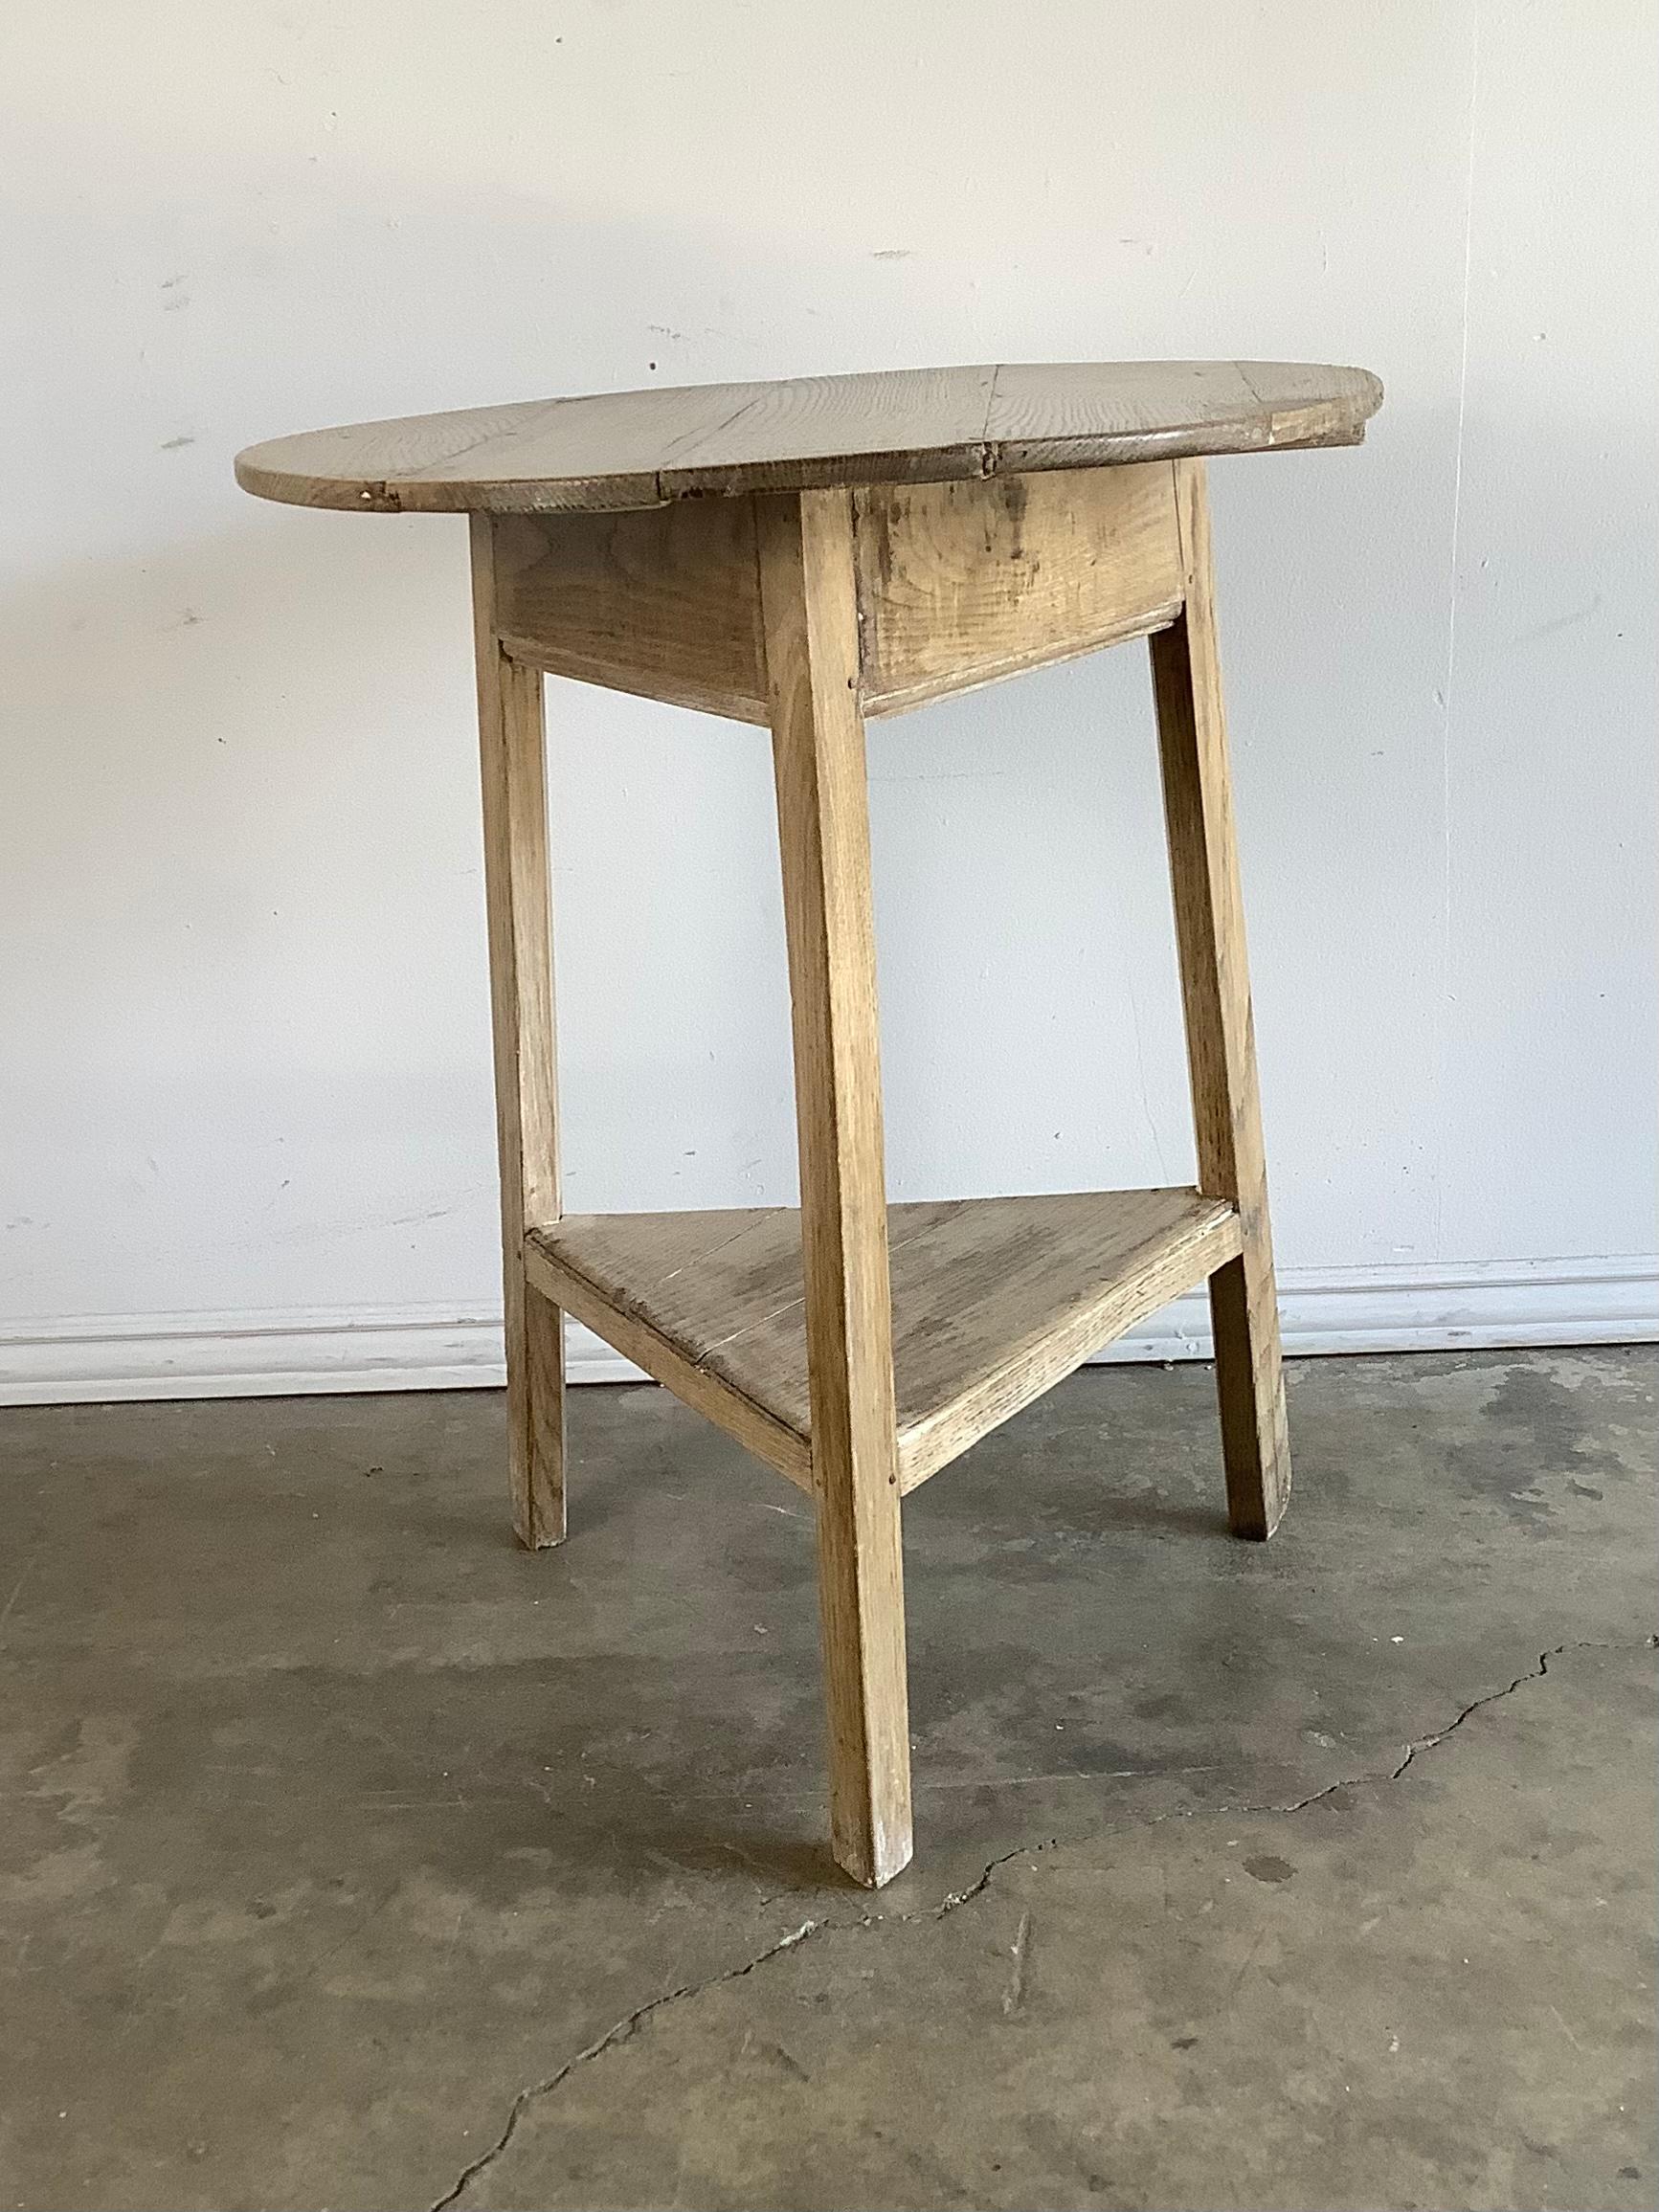 Charming 19th c. two-tiered white washed Oak Cricket table. The tripod table stands on three legs that connect to a center triangular shelf. It is the perfect accent table for any location.